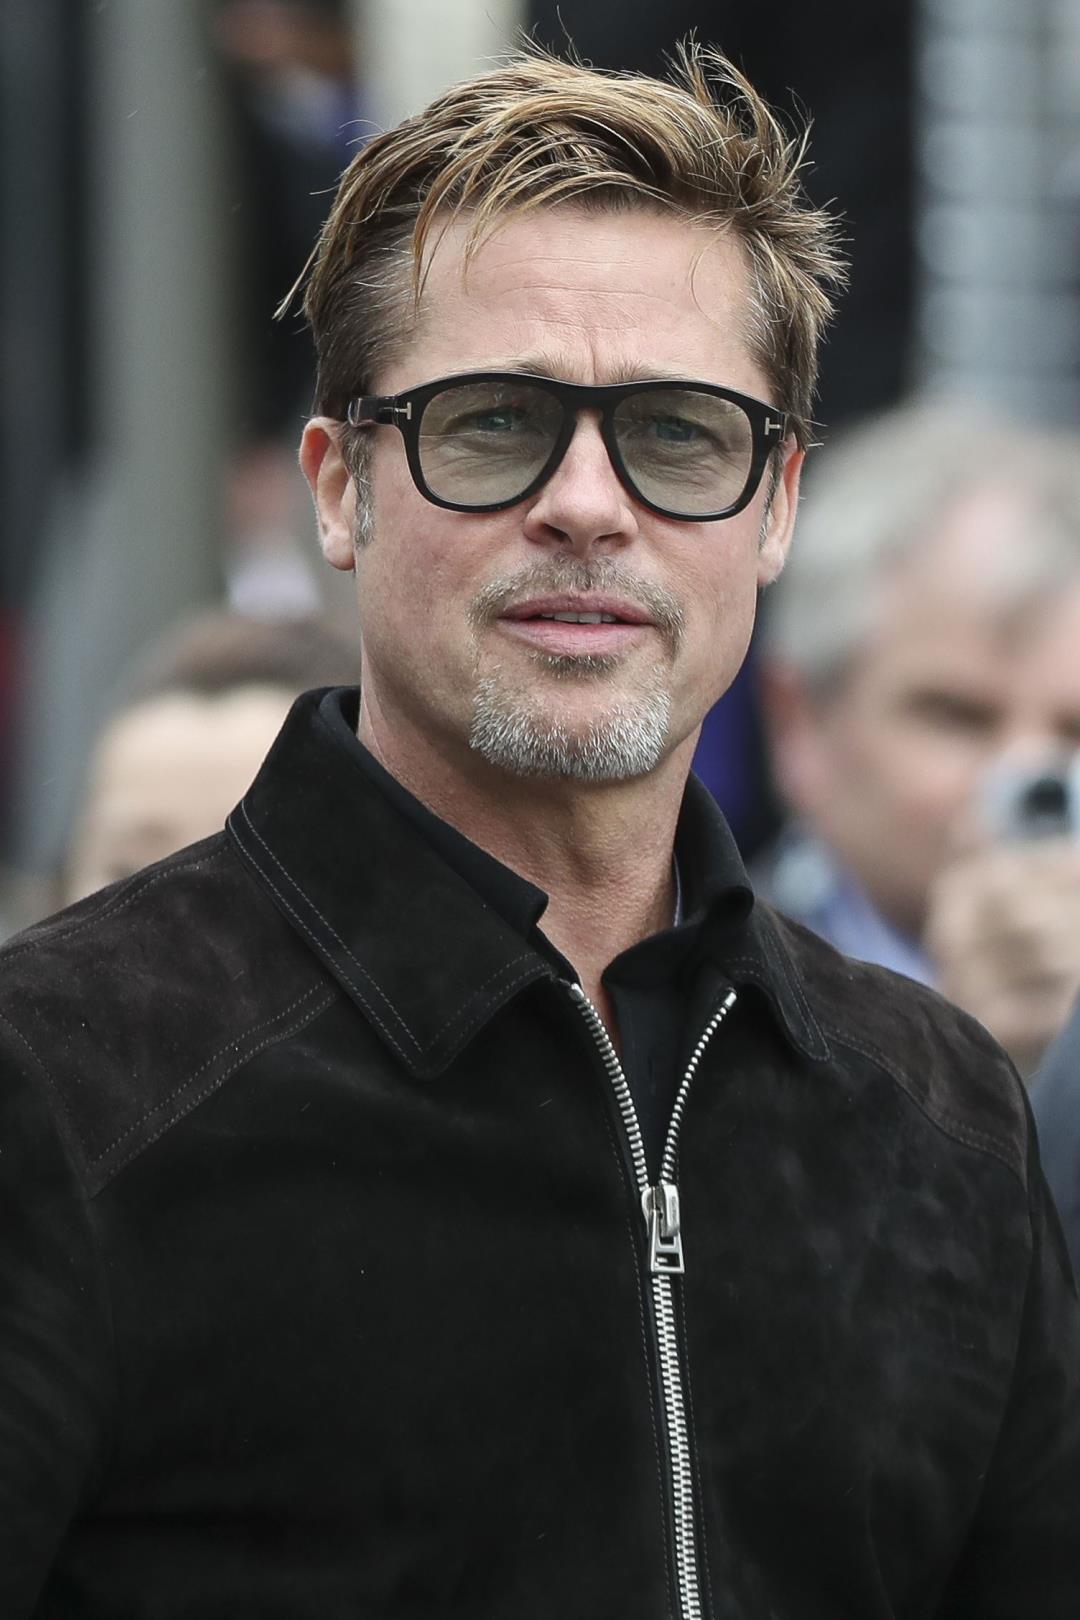 Brad Pitt Cancels Appearance to 'Focus on Family Situation'